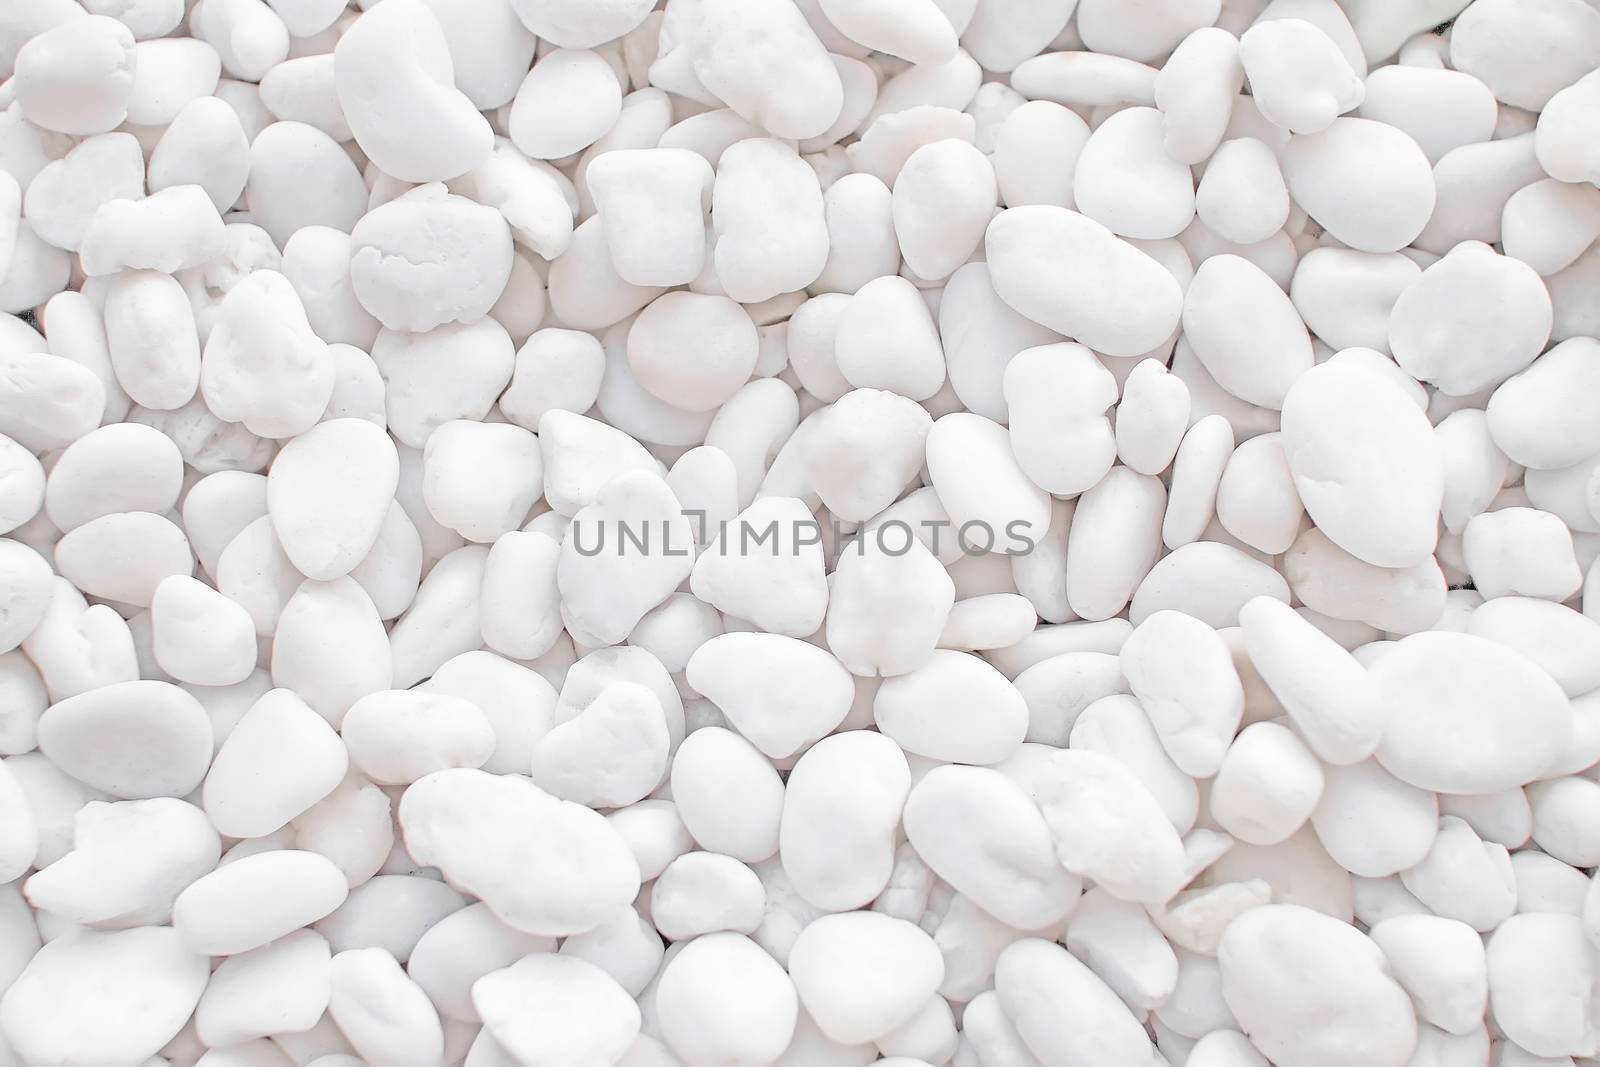 white rock pebbles by nopparats